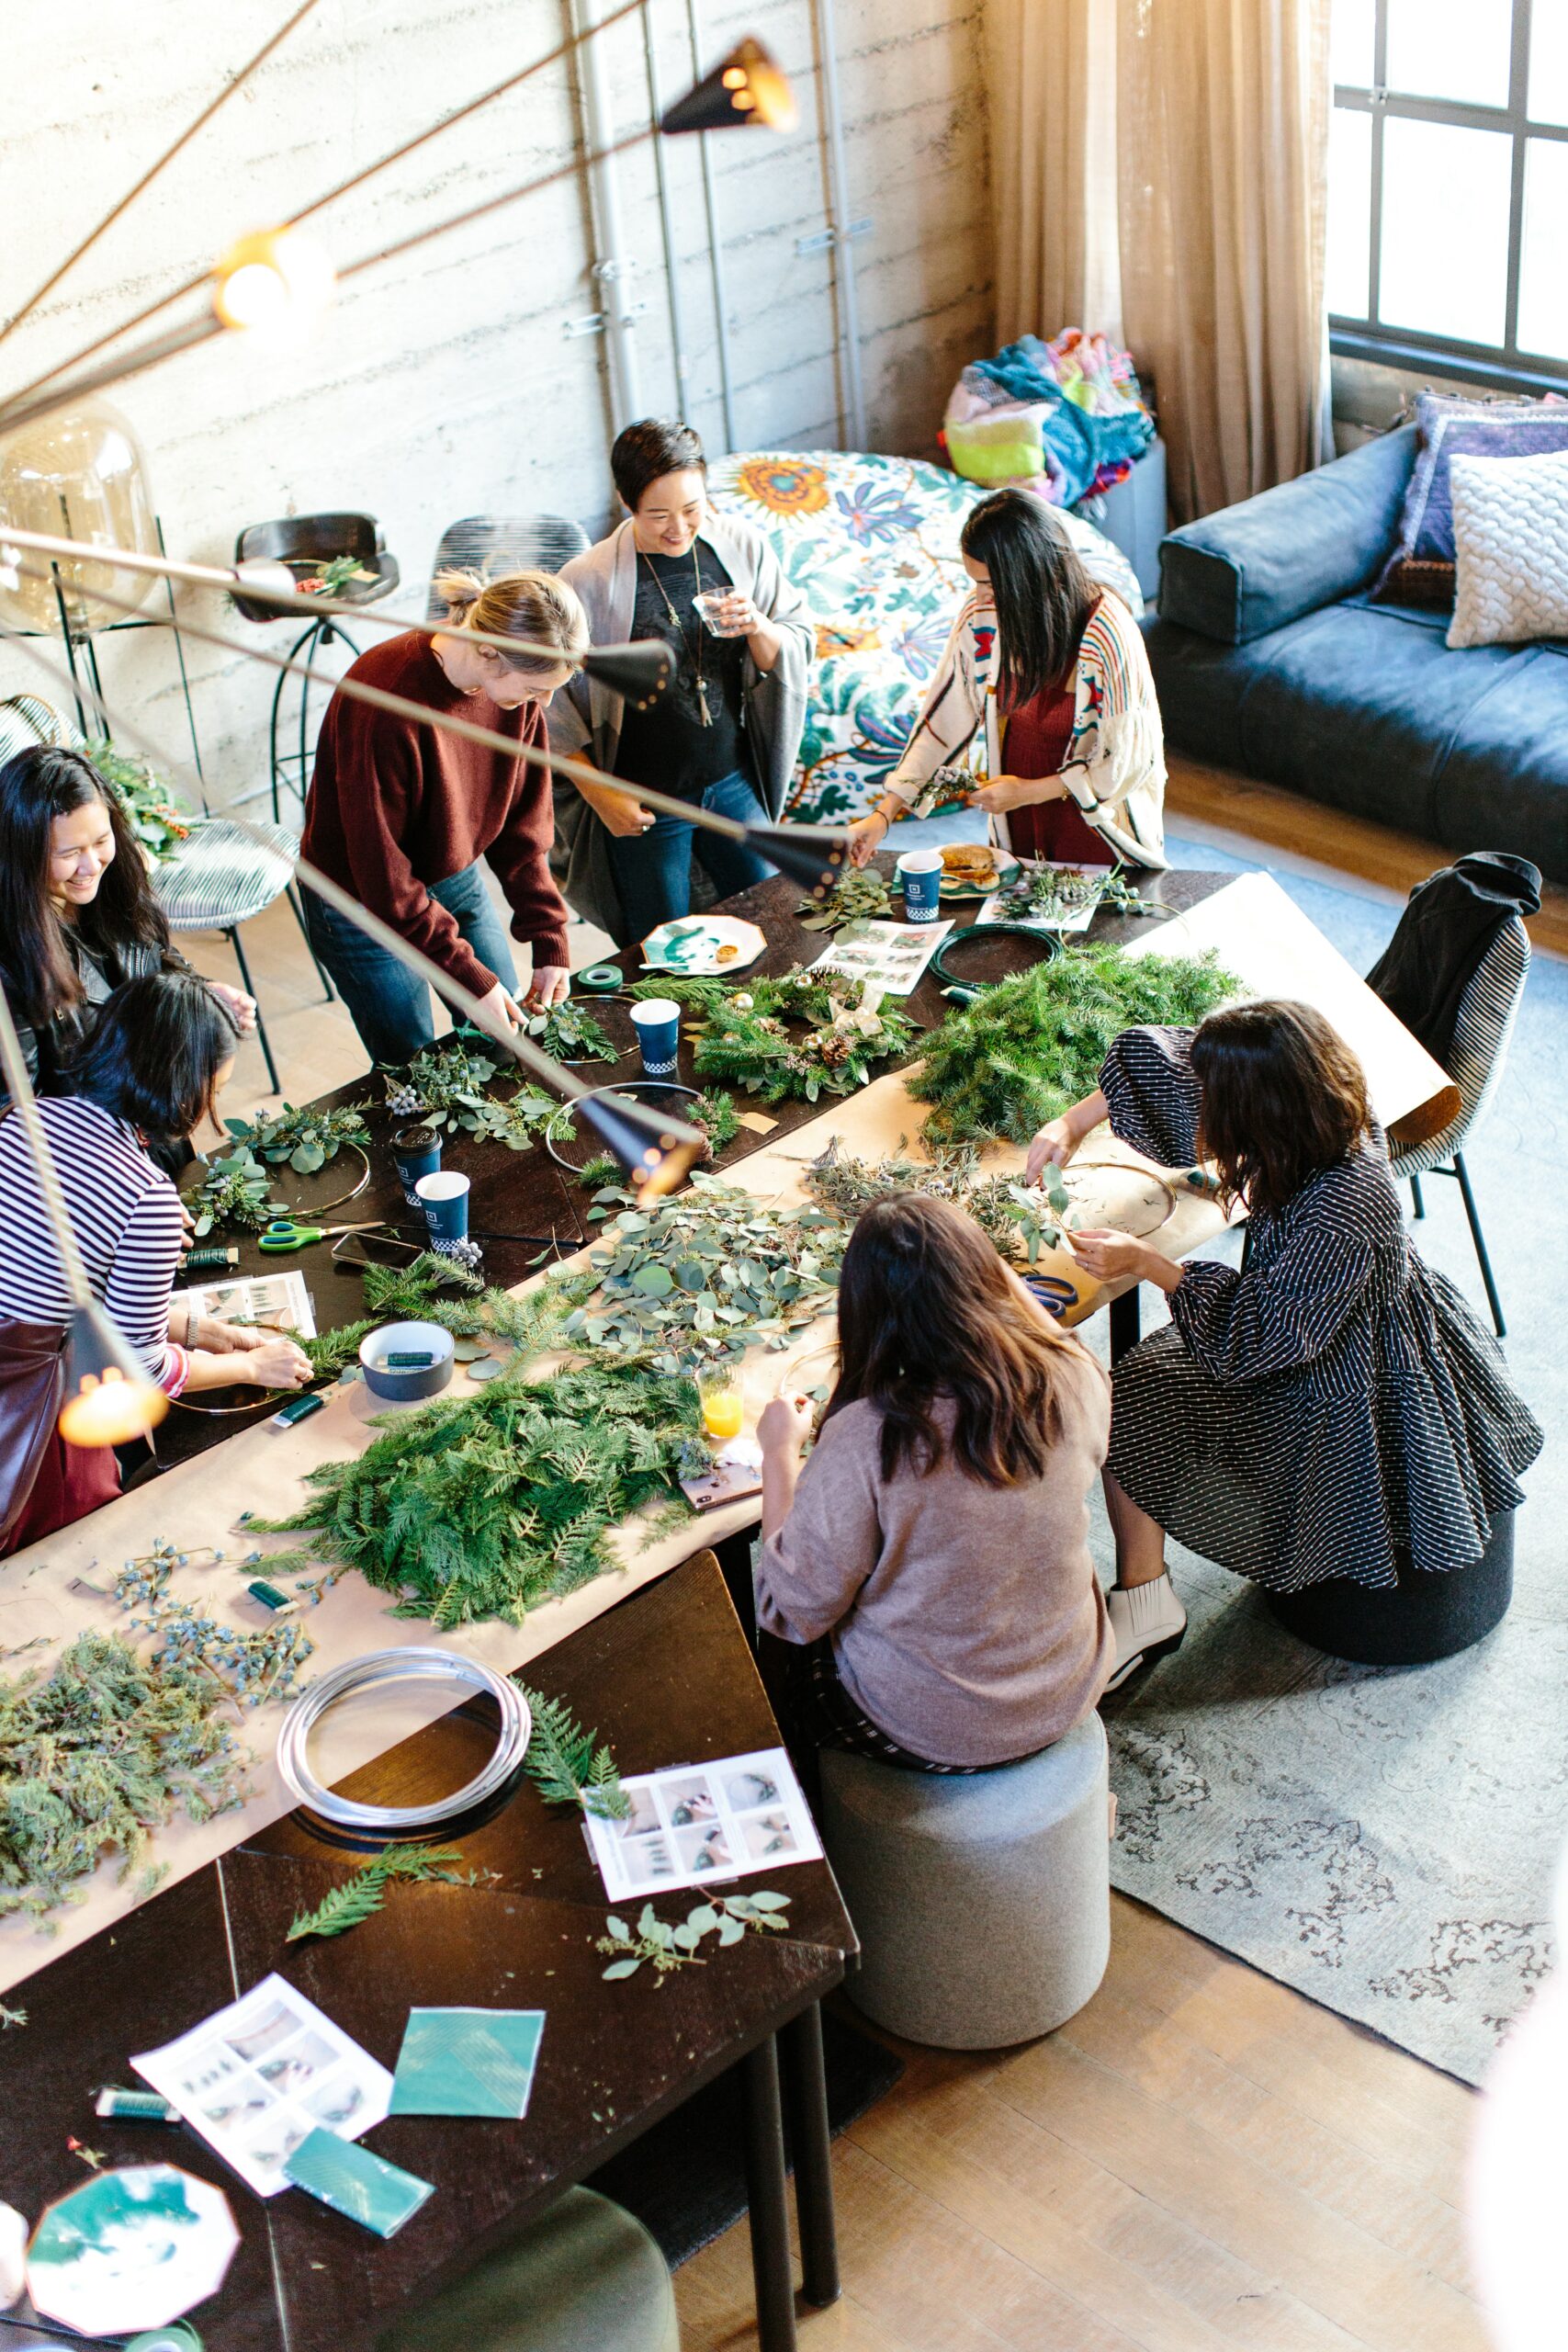 Group of people sitting at a table looking at plants